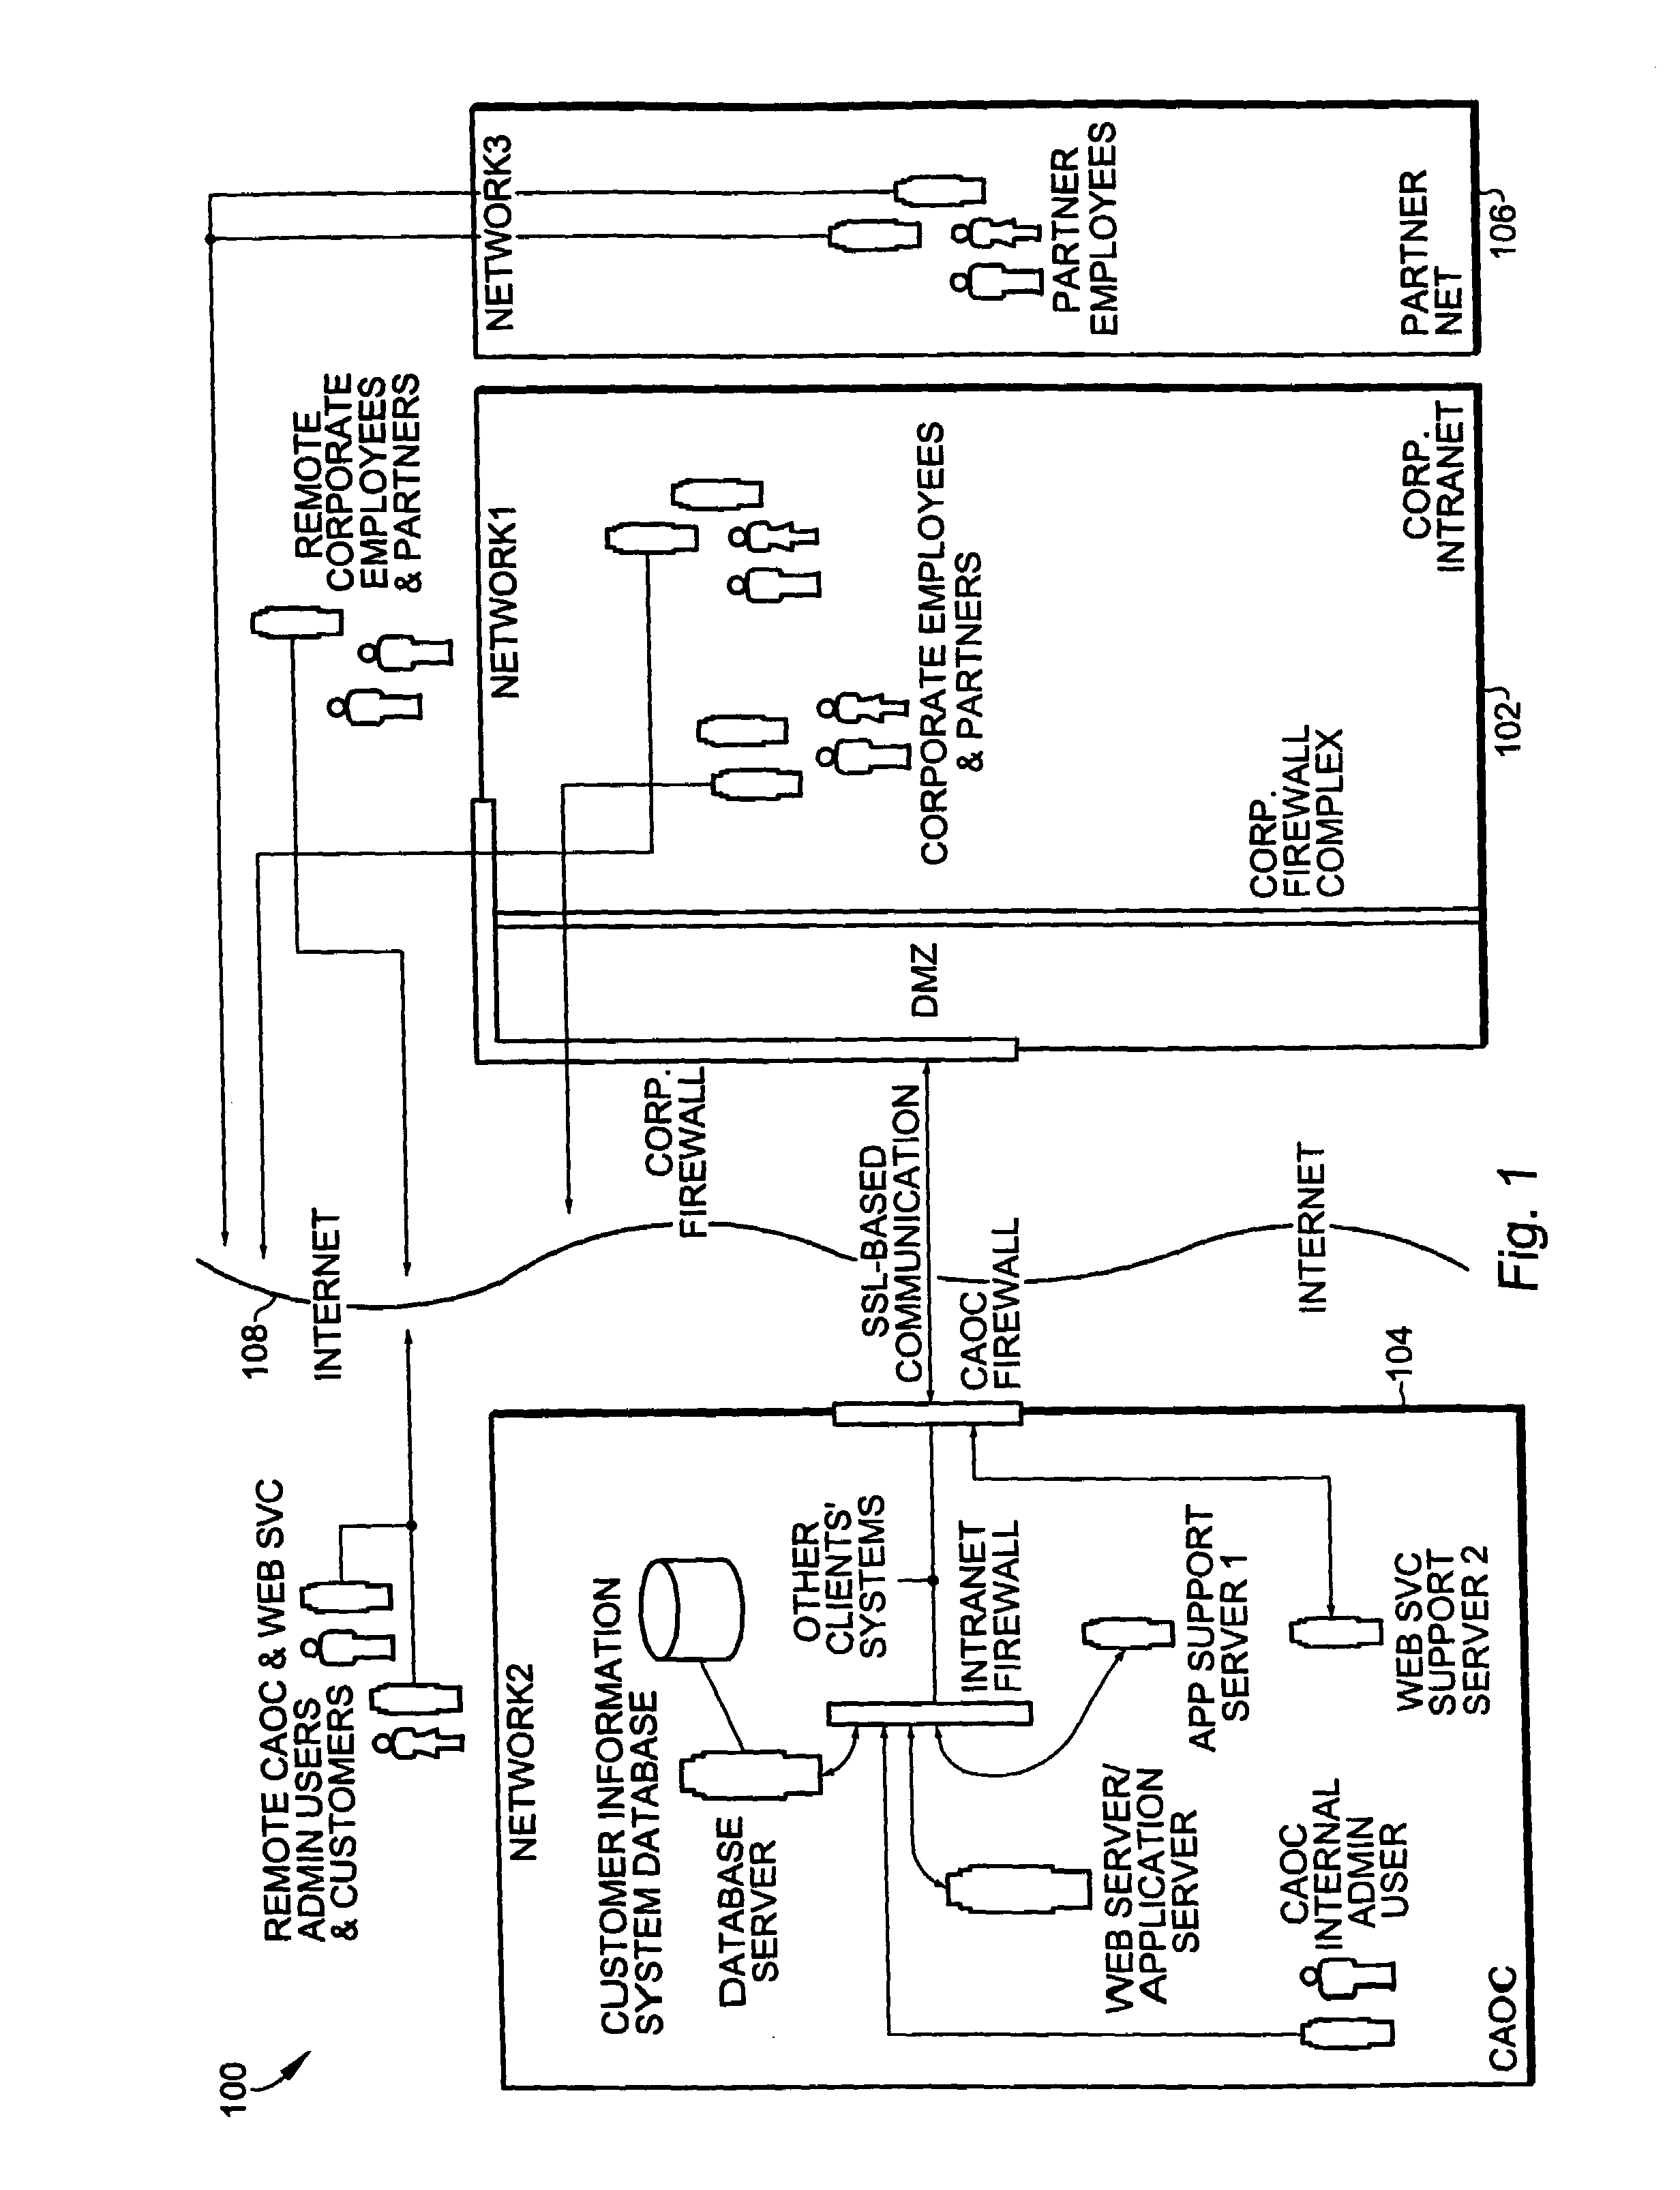 Methods and apparatus for persistence of authentication and authorization for a multi-tenant internet hosted site using cookies